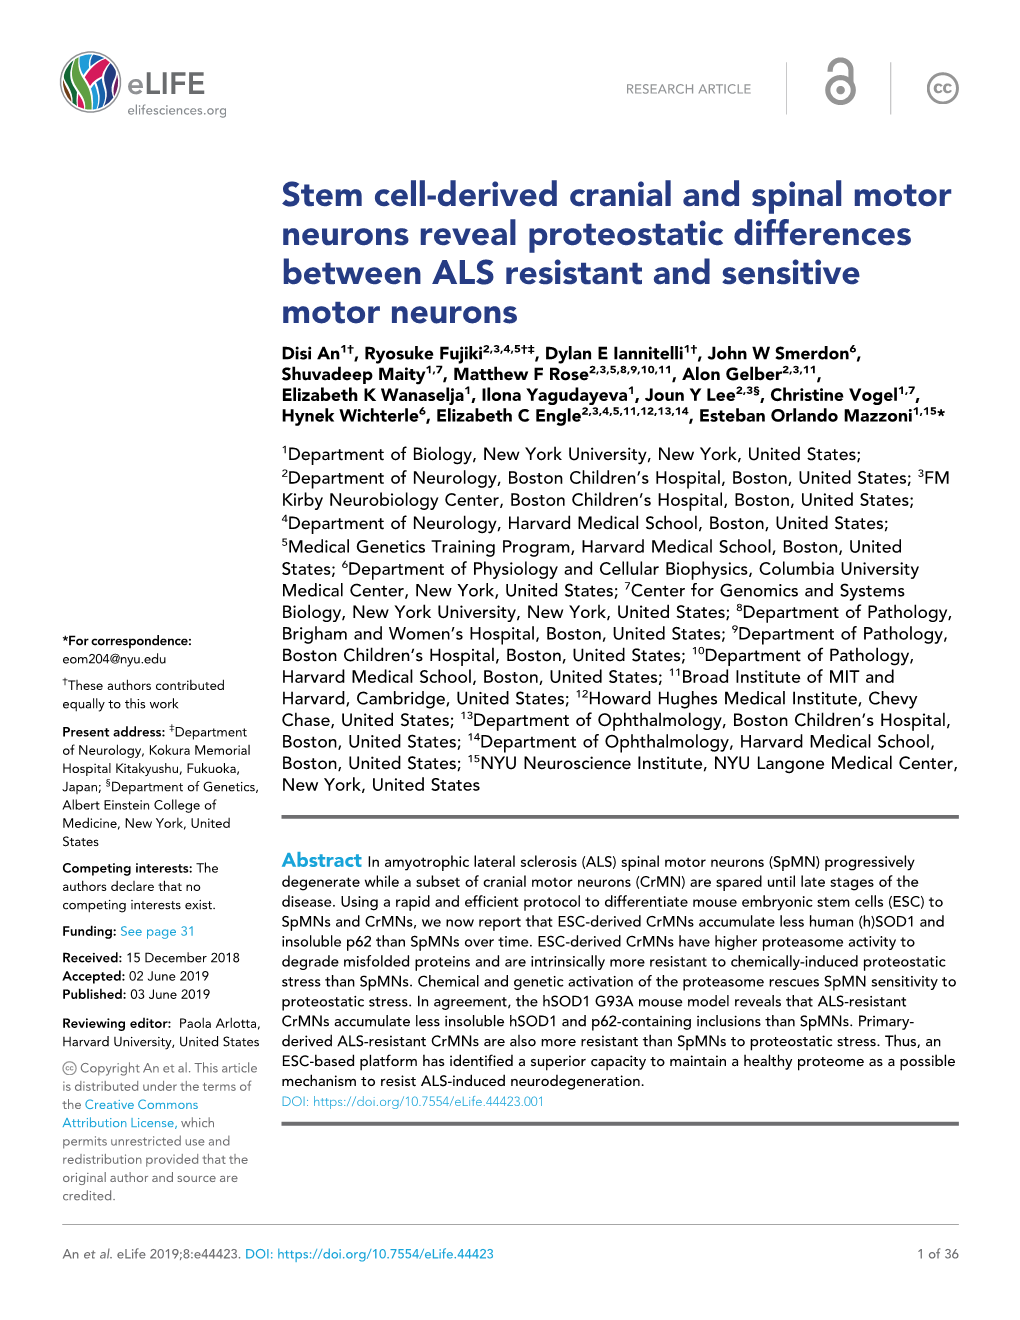 Stem Cell-Derived Cranial and Spinal Motor Neurons Reveal Proteostatic